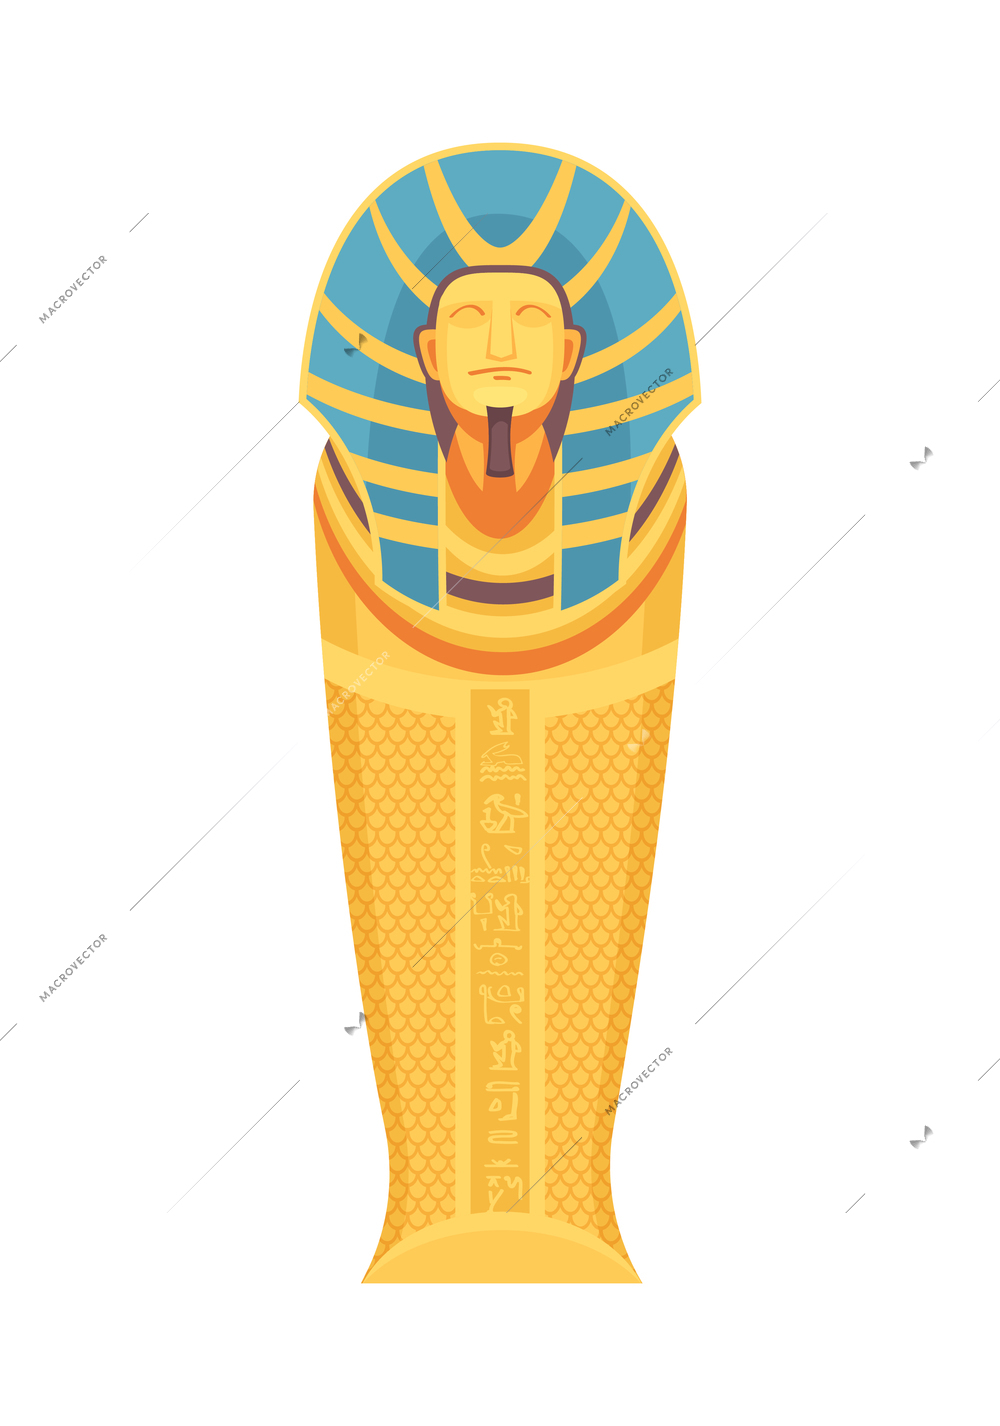 Egyptian tomb composition with isolated image of decorated golden tomb for pharaoh mummy vector illustration